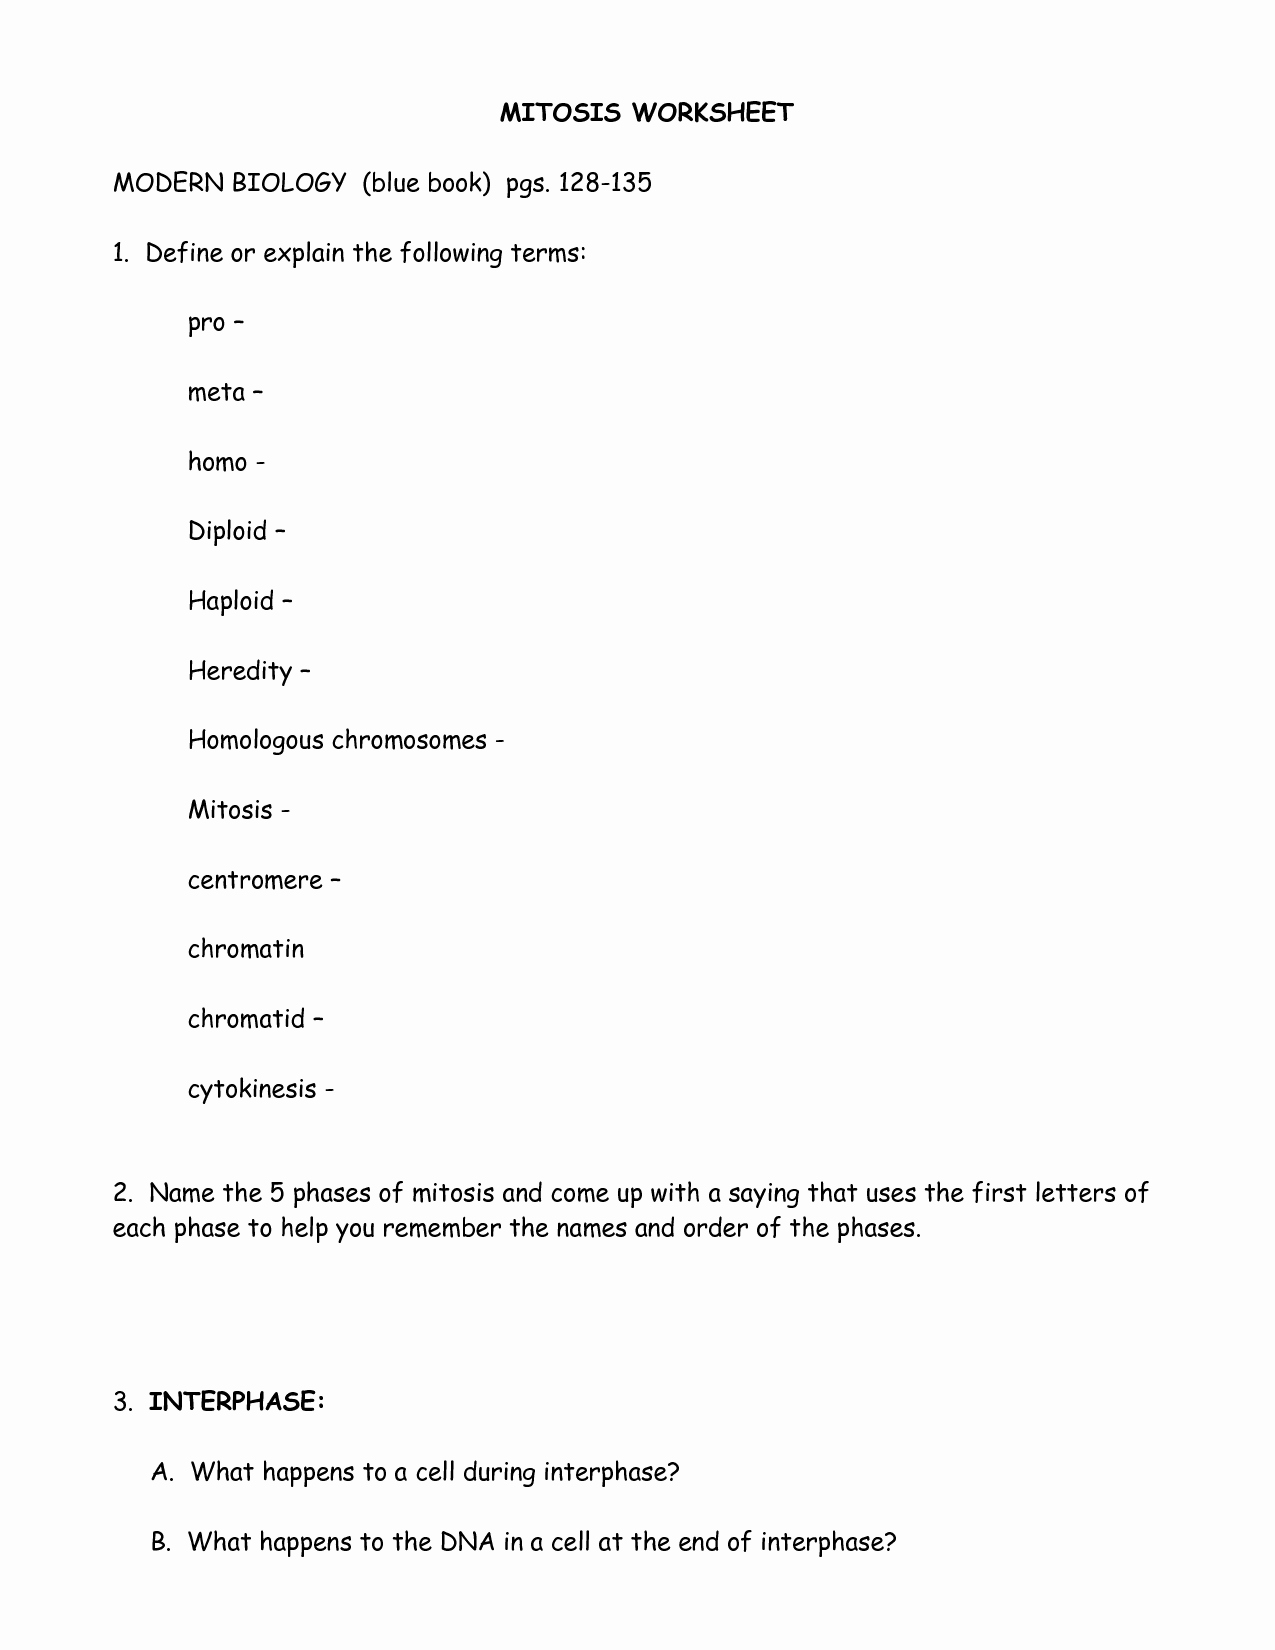 50 Cells Alive Worksheet Answer Key | Chessmuseum Template ...